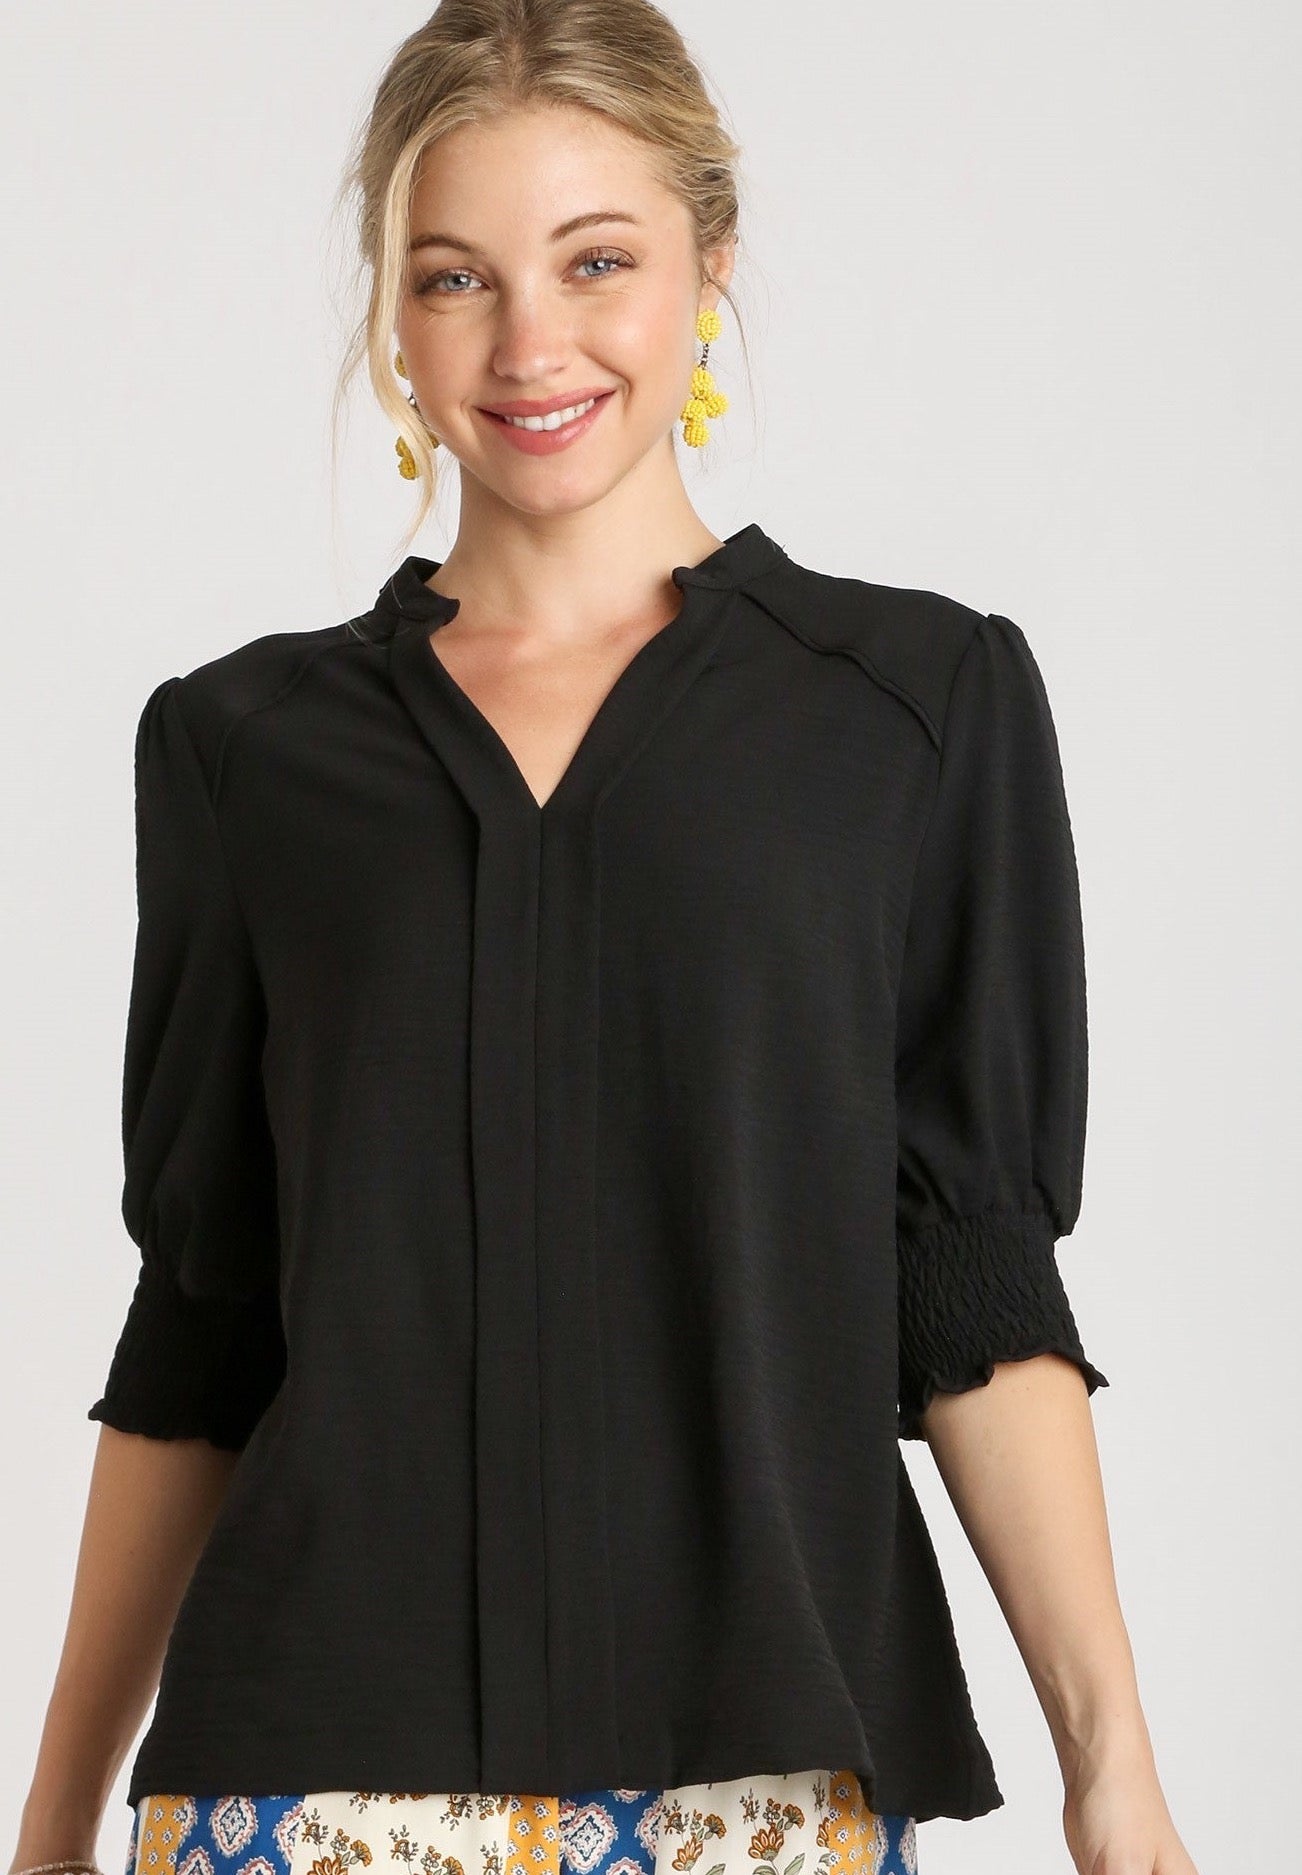 Umgee Tangled Top - Black, 3/4 sleeve with smocked cuff, pleated v-neck with trim, plus size